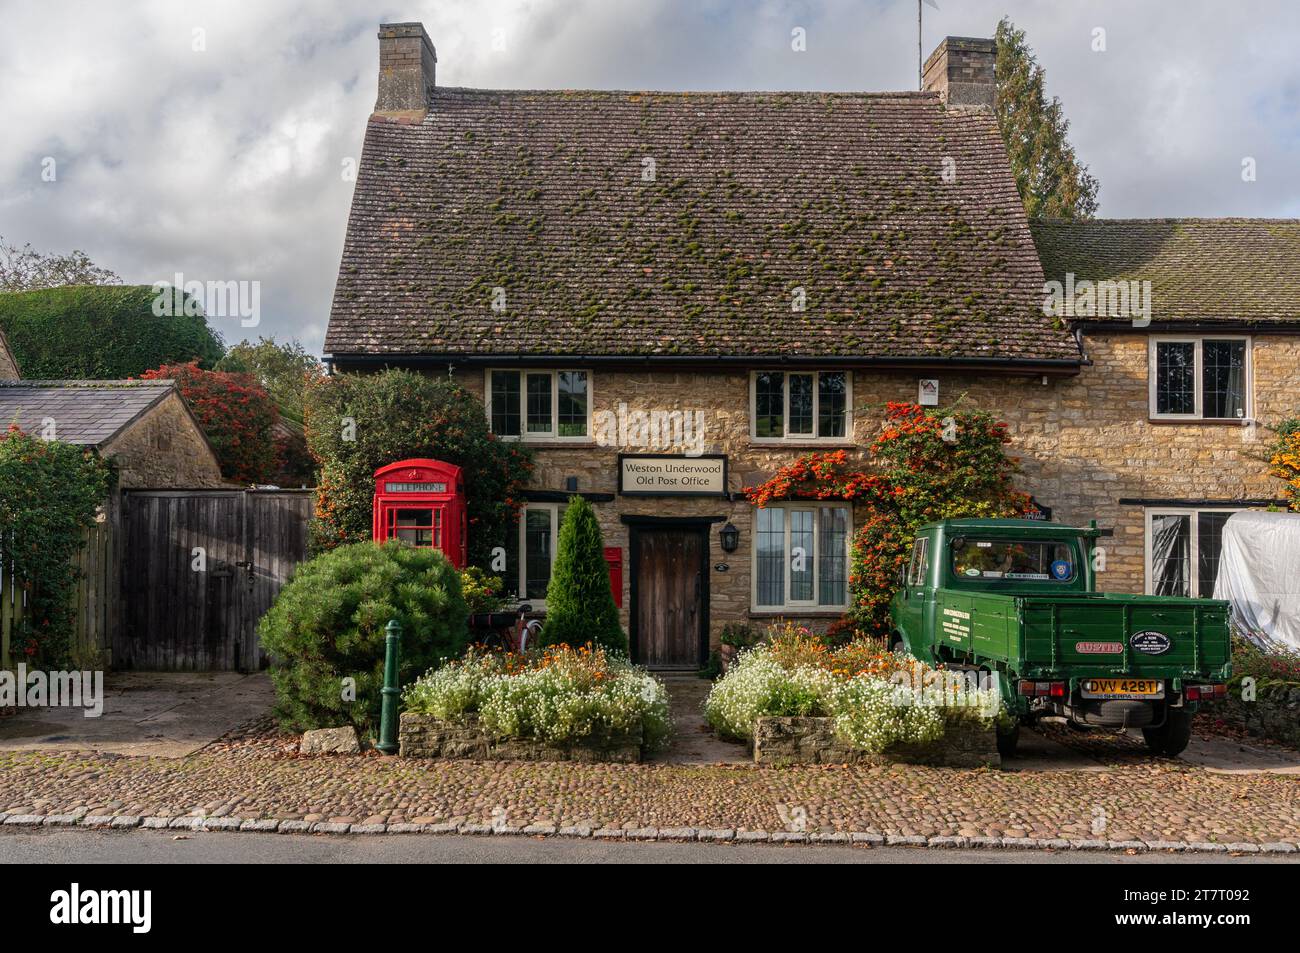 The Old Post Office, now a private residence, in the pretty village of Weston Underwood, Buckinghamshire, UK Stock Photo